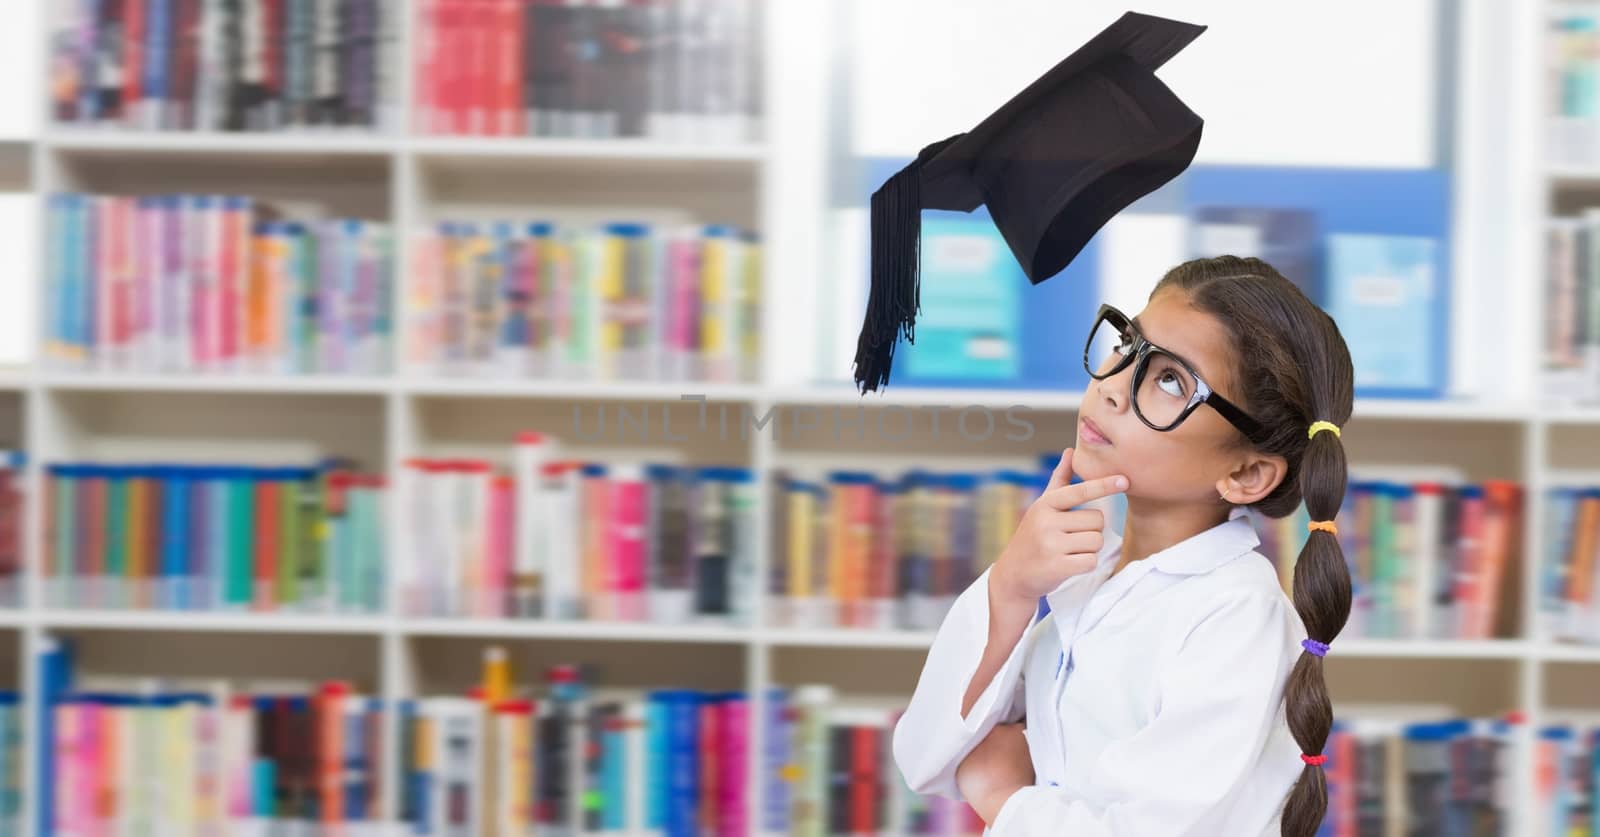 Digital composite of Science School girl in education library with graduation hat